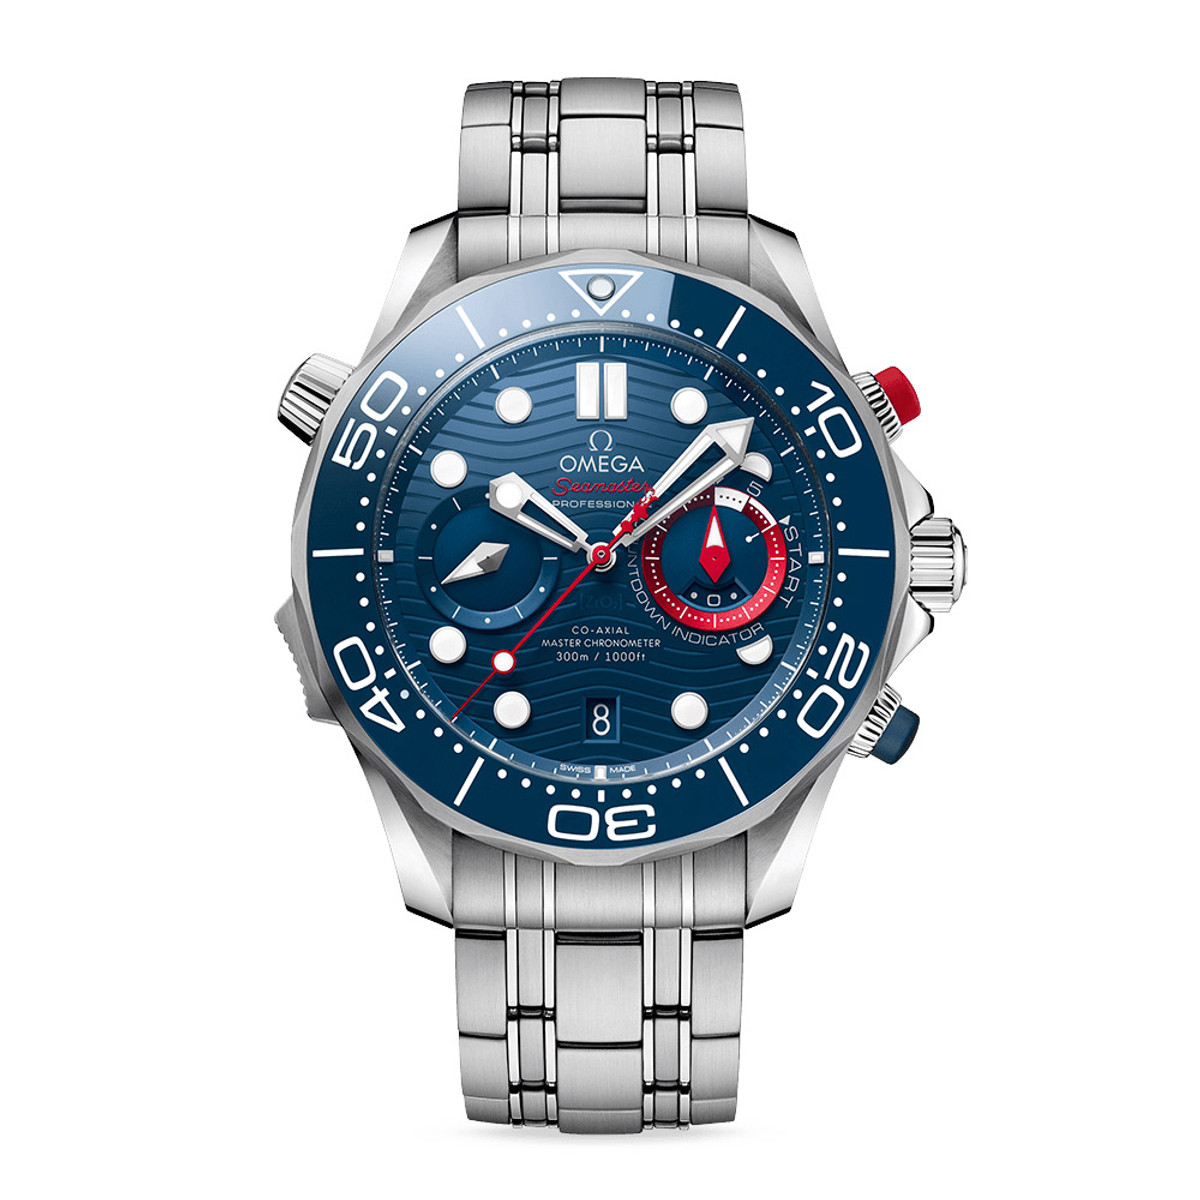 Omega Seamaster Diver 300M Chronograph America's Cup 44mm 210.30.44.51.03.002-30066